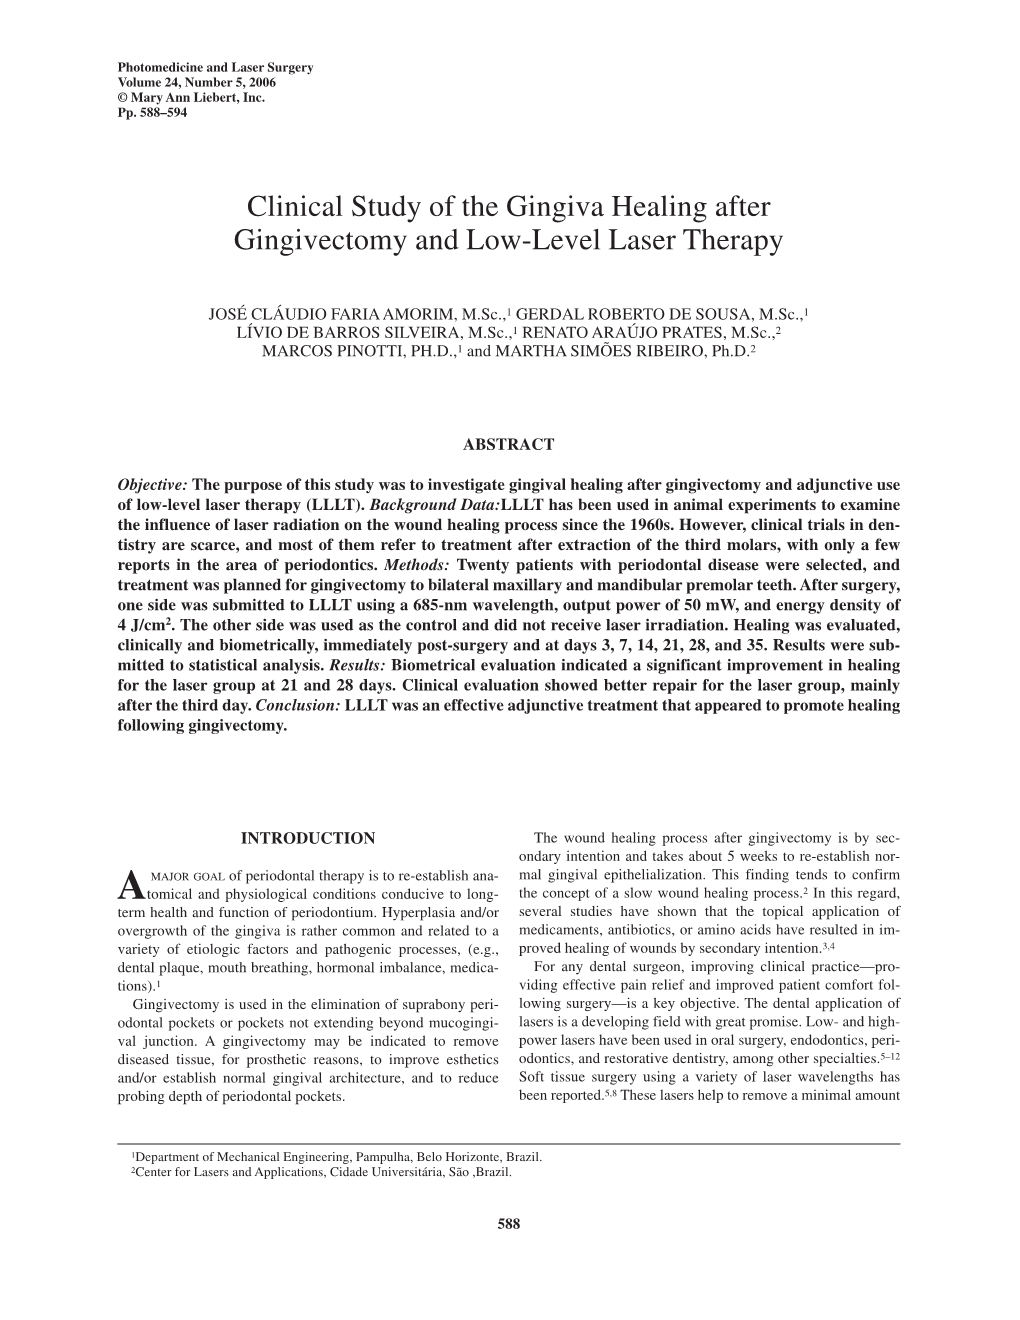 Clinical Study of the Gingiva Healing After Gingivectomy and Low-Level Laser Therapy